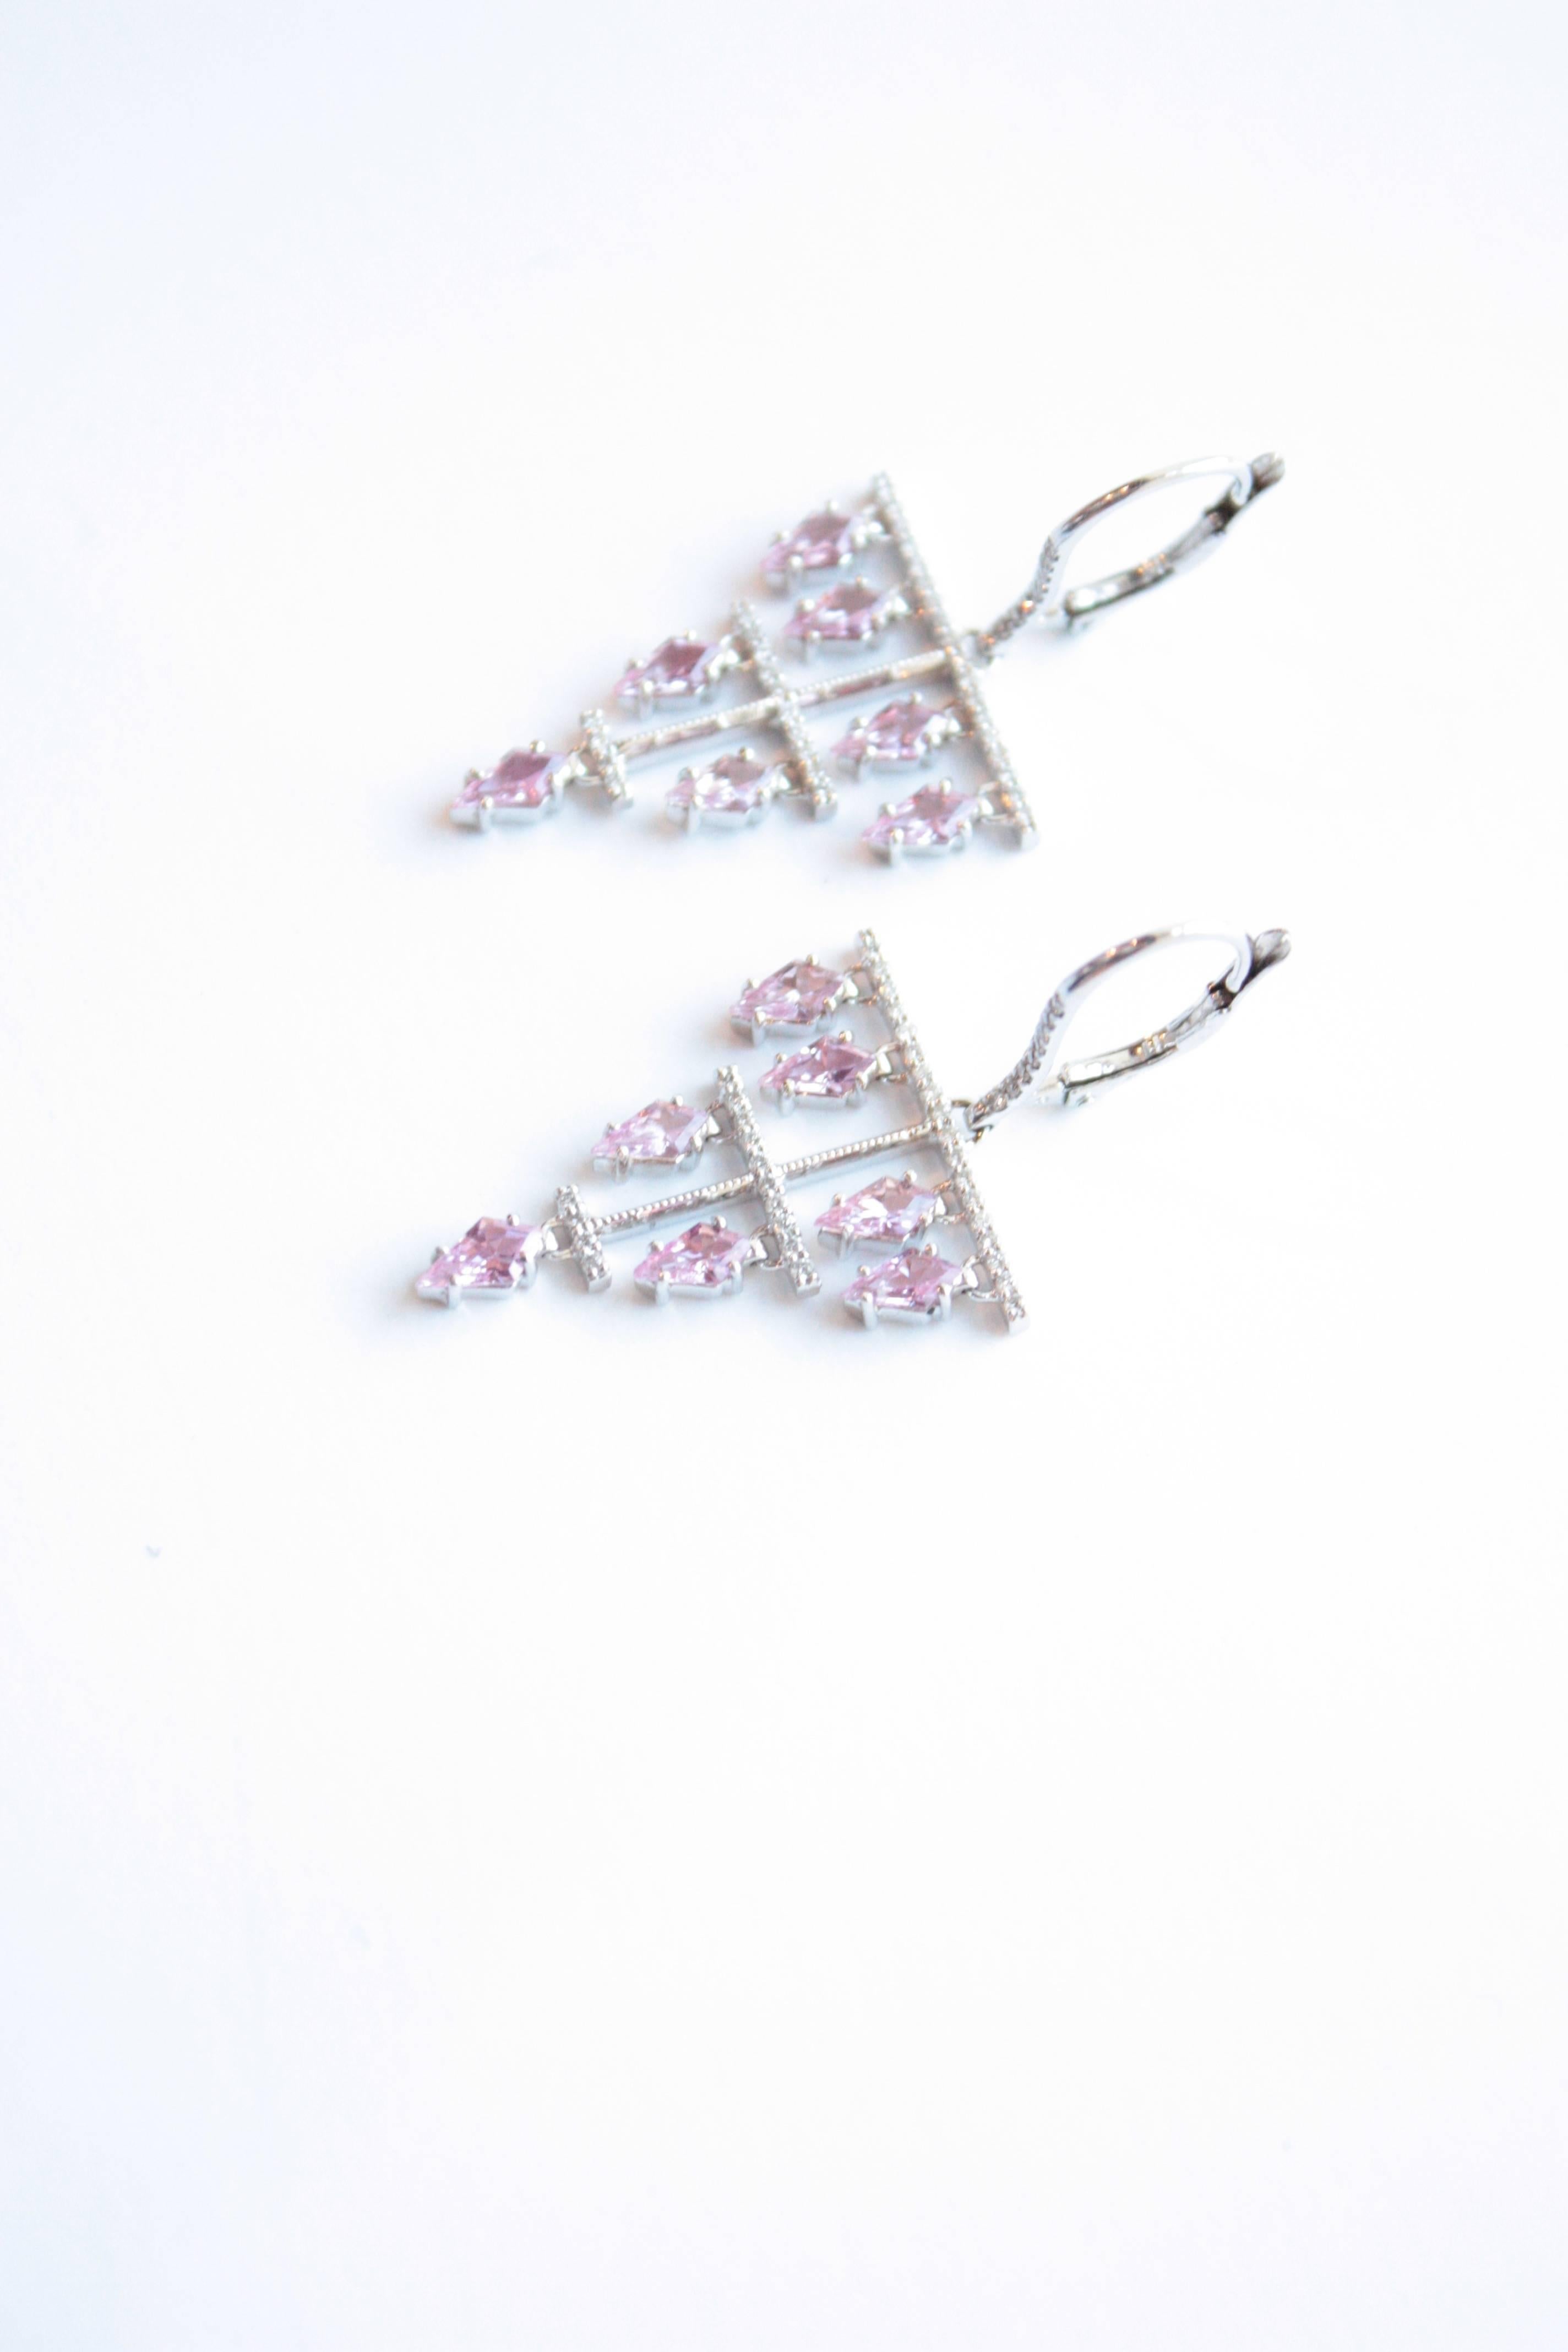 Dora Eardrops
A pair of eighteen-karat white gold fluid eardrops, each suspending seven diamond-shaped pink sapphires.  The overall contour of this earring was meant to connect with the shape of each individual pink sapphire. 
Diamond Total Weight –